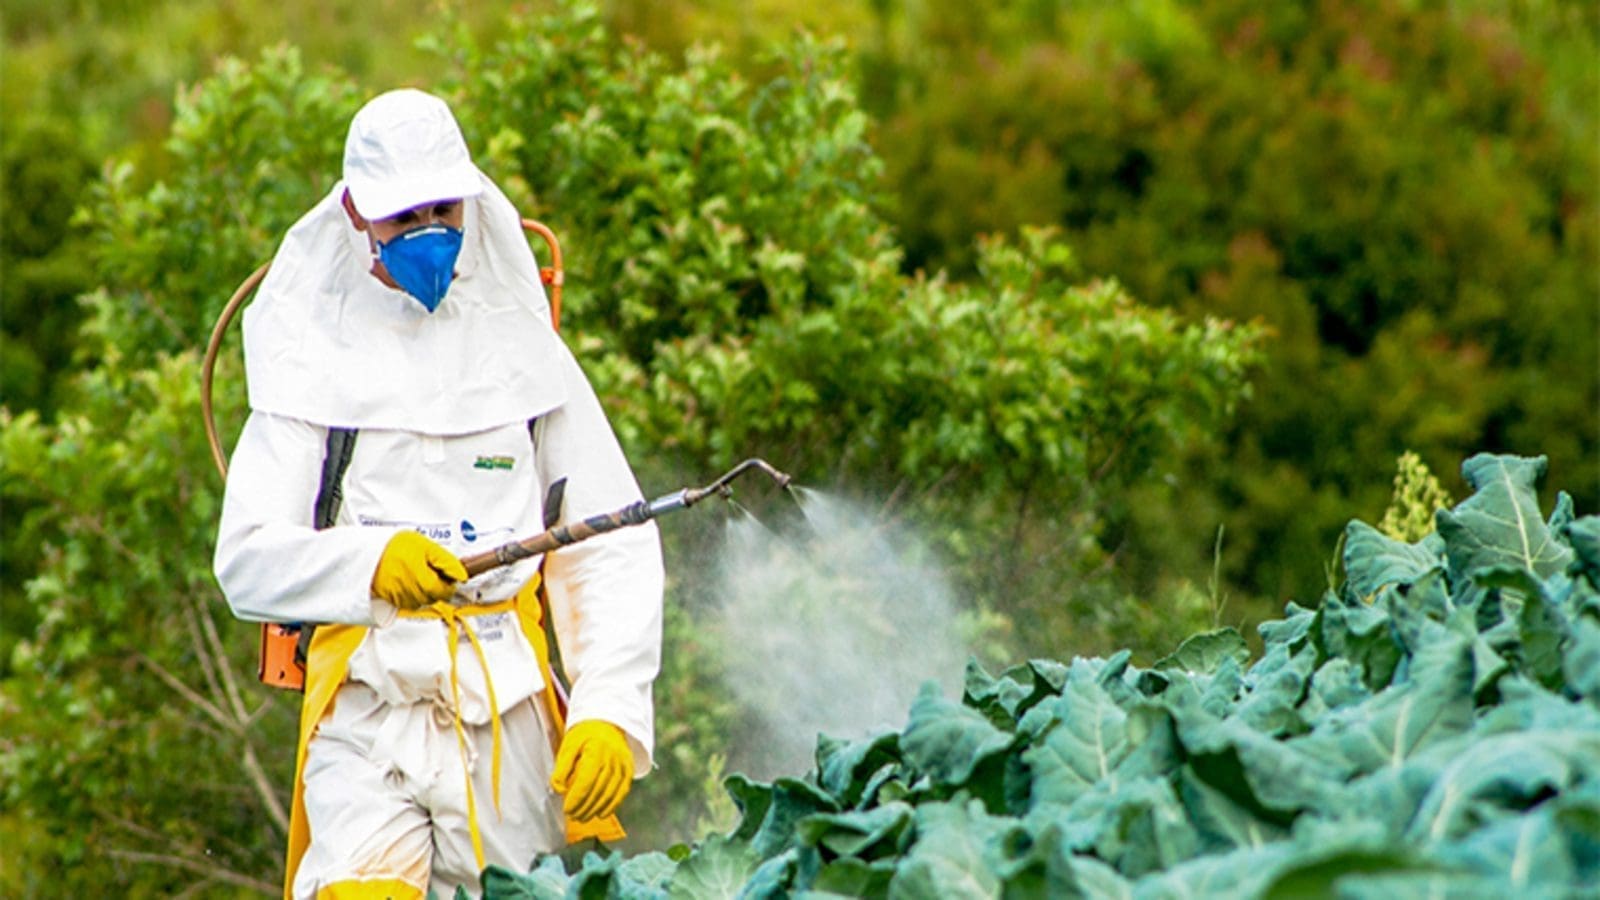 FDA pesticide report reveals low levels of pesticide residue in food, feed